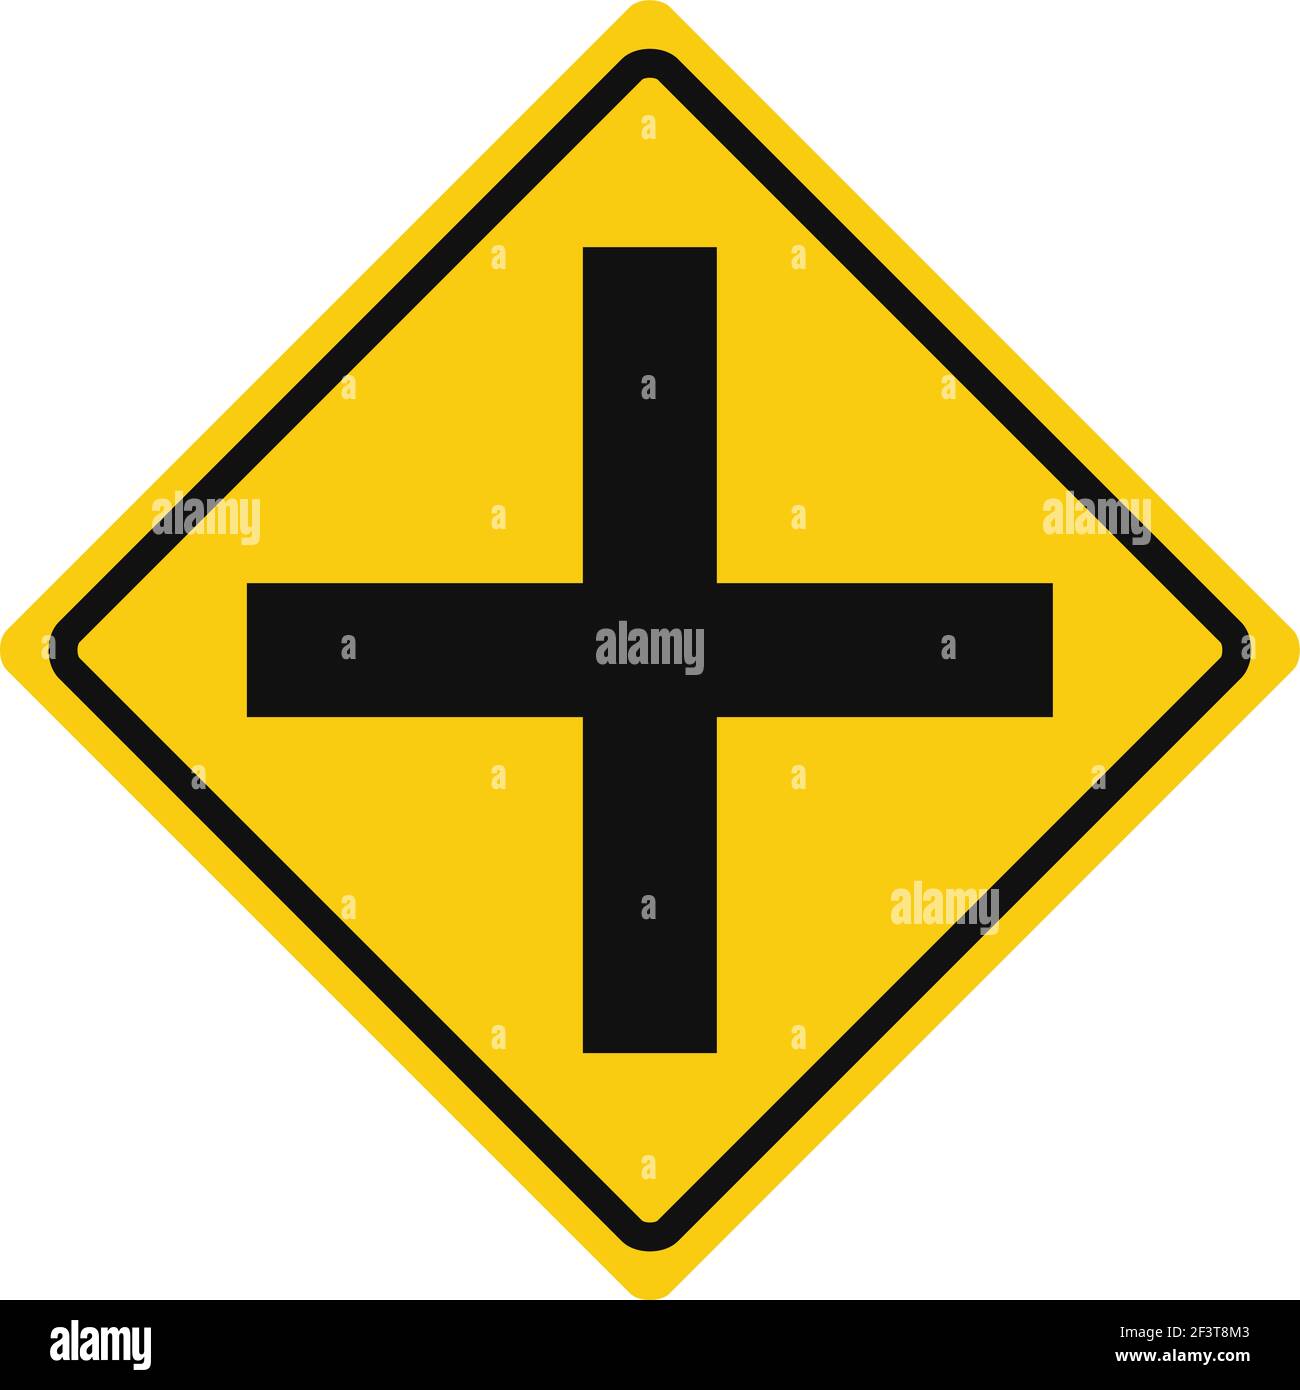 Rhomboid traffic signal in yellow and black, isolated on white background. Warning of crossroad Stock Vector